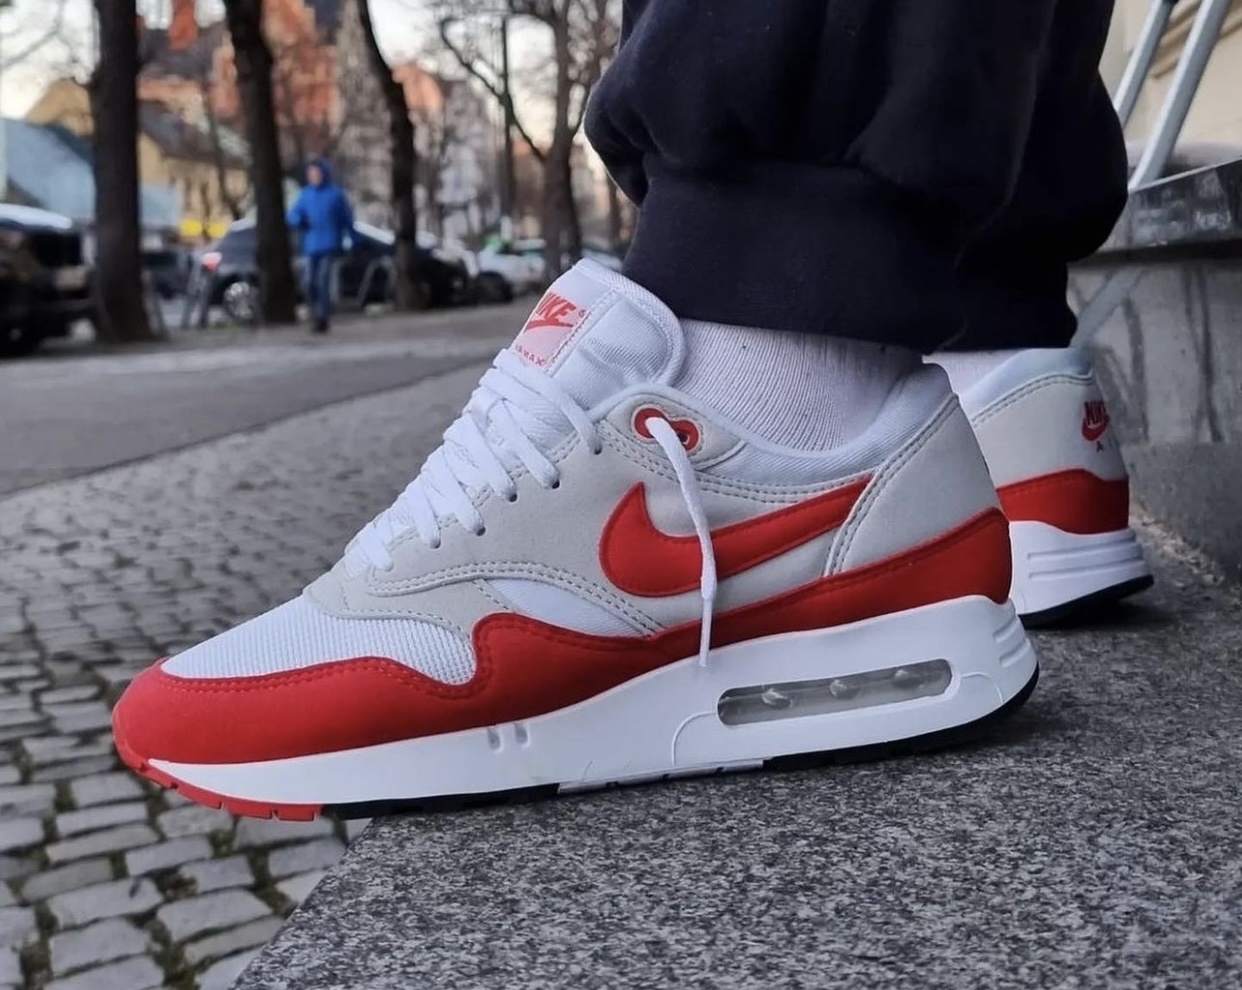 Nike WMNS Air Max 1 86 OG Big Bubble Red